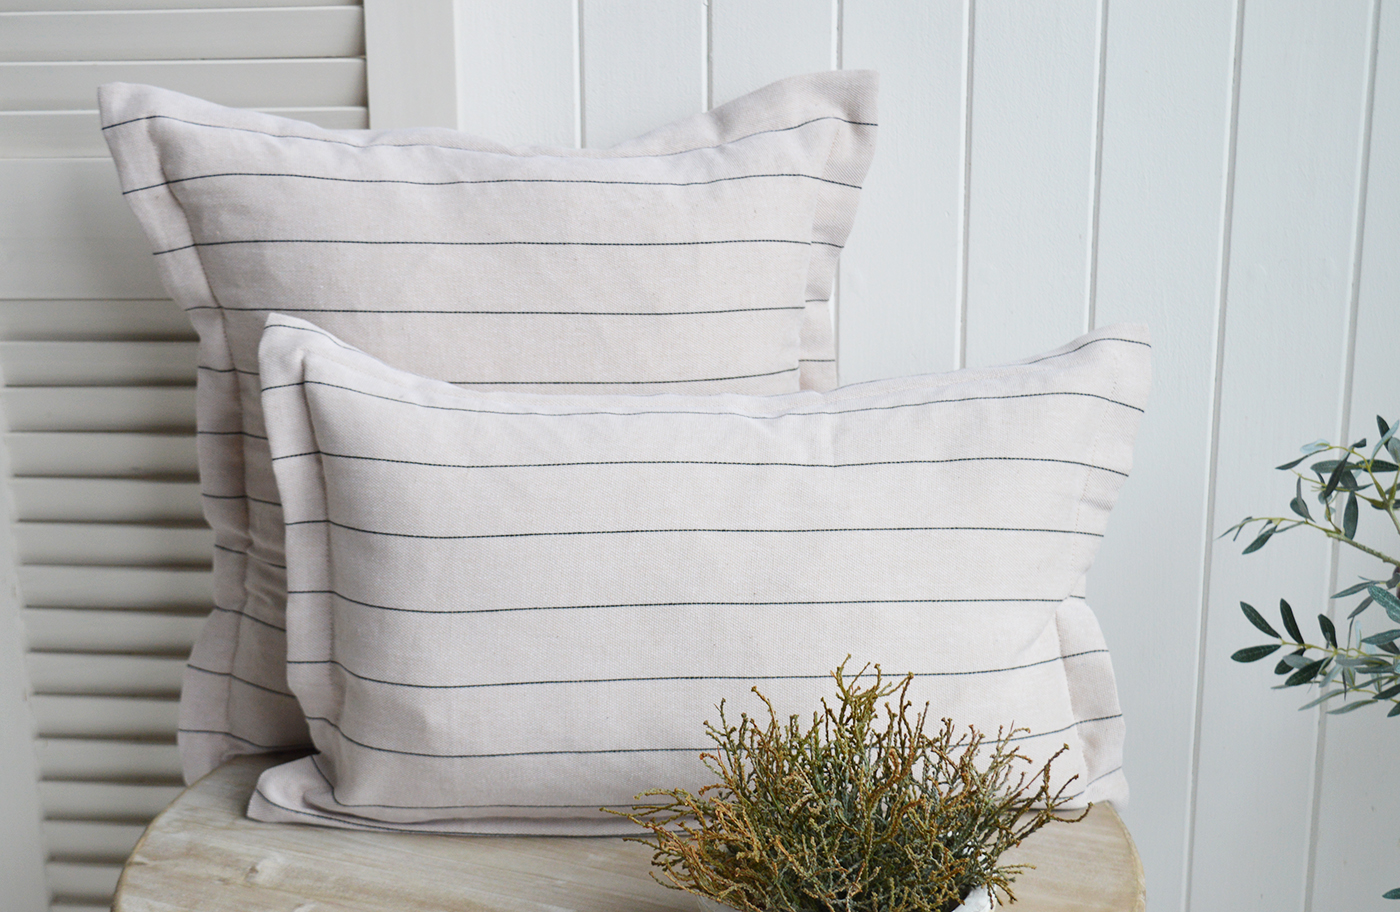 New England Style Country, Coastal and White Furniture and accessories for the home. Hamptons and New England coastal cushions and soft furnishings - Peabody Stripe Cushion Cover i rectangle and square